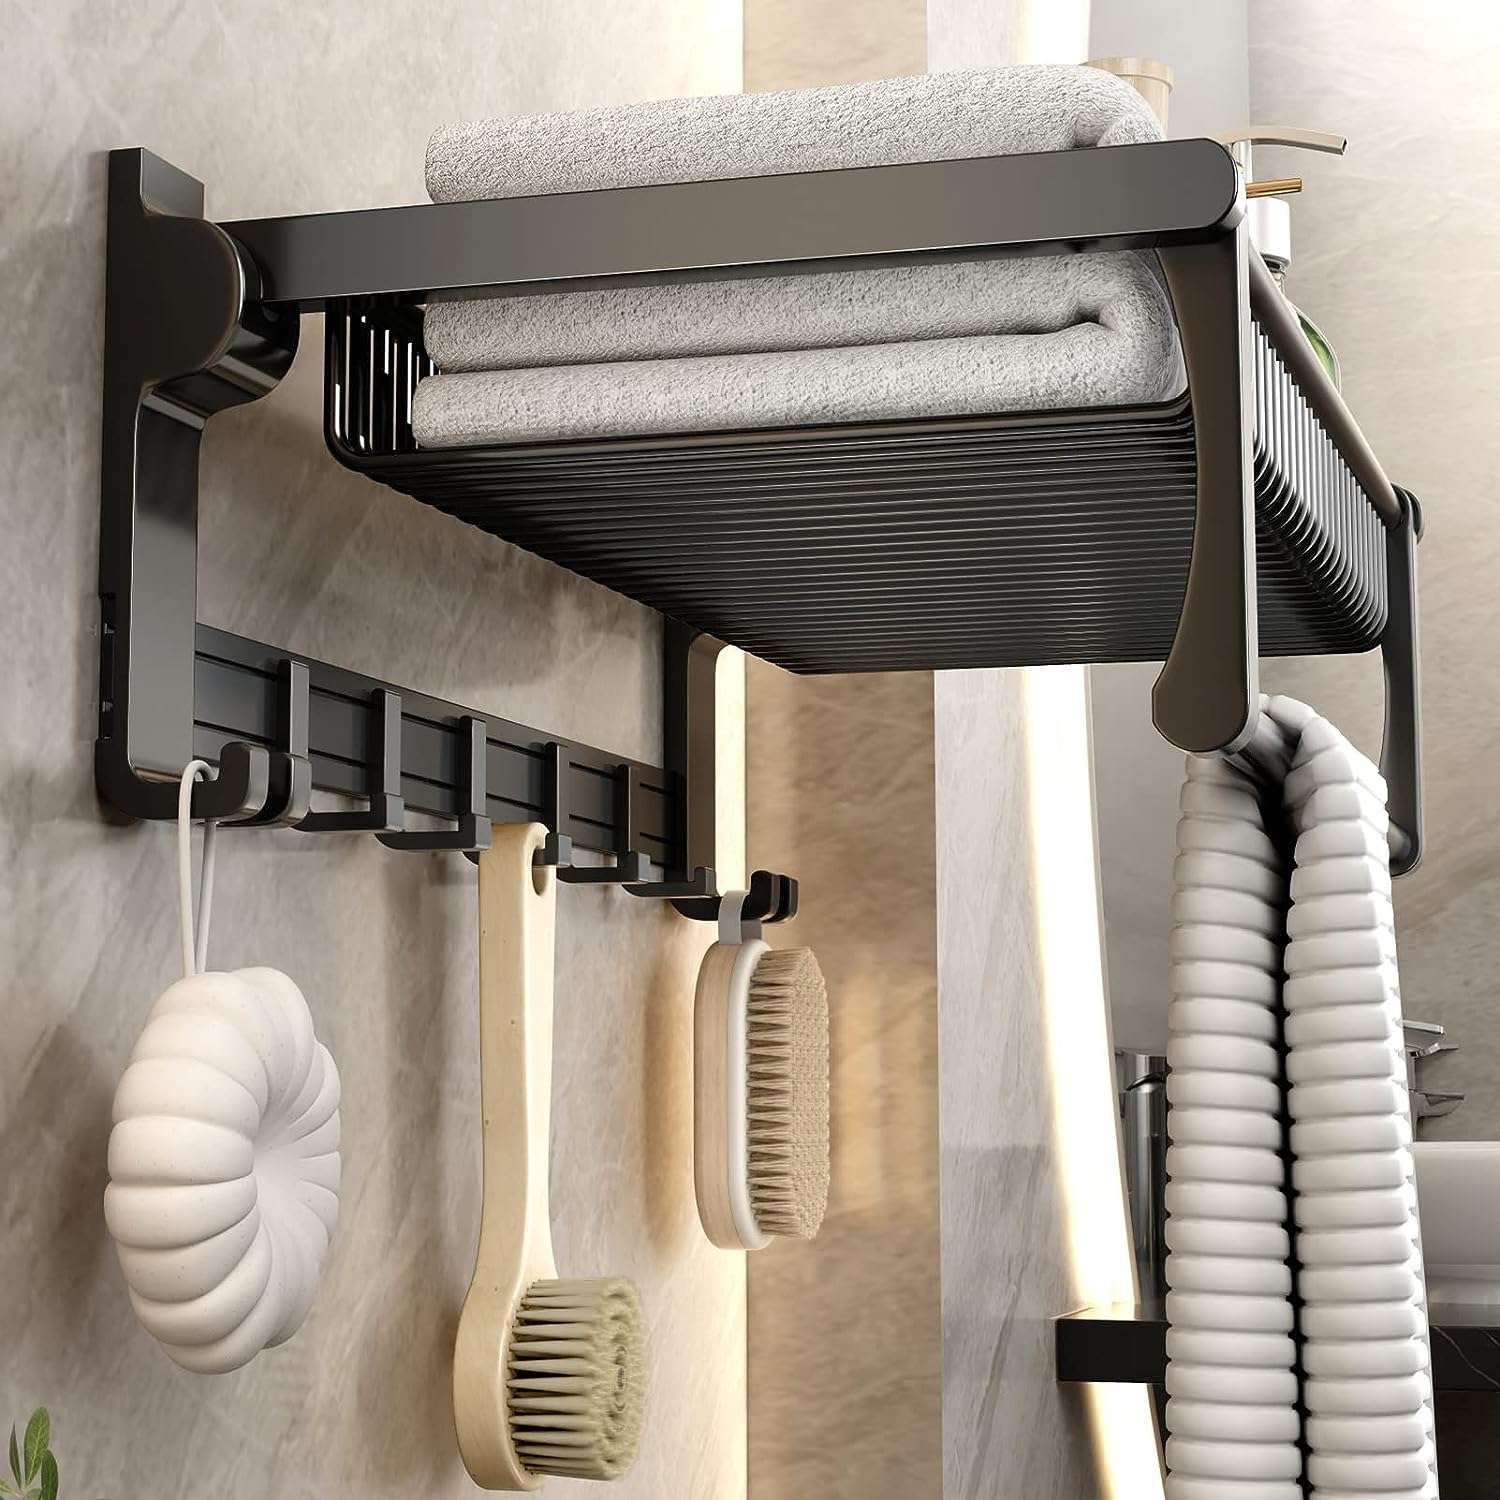 What To Put On Towel Rack Besides Towels